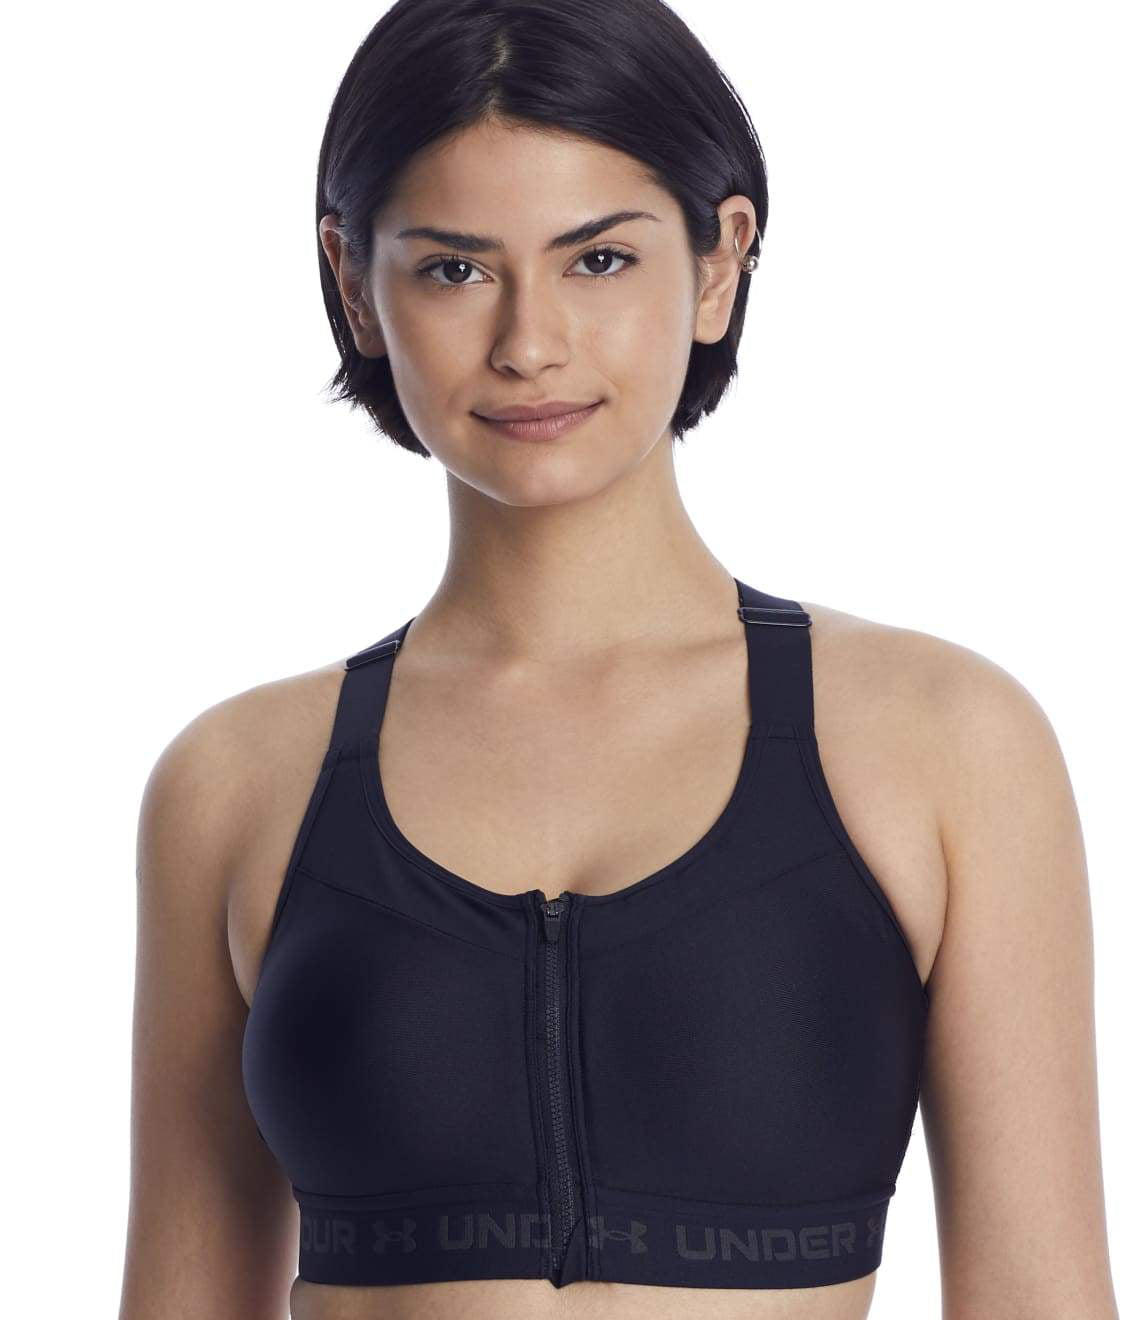 Under Armour BLACK Armour High Crossback Zip Front Sports Bra, US